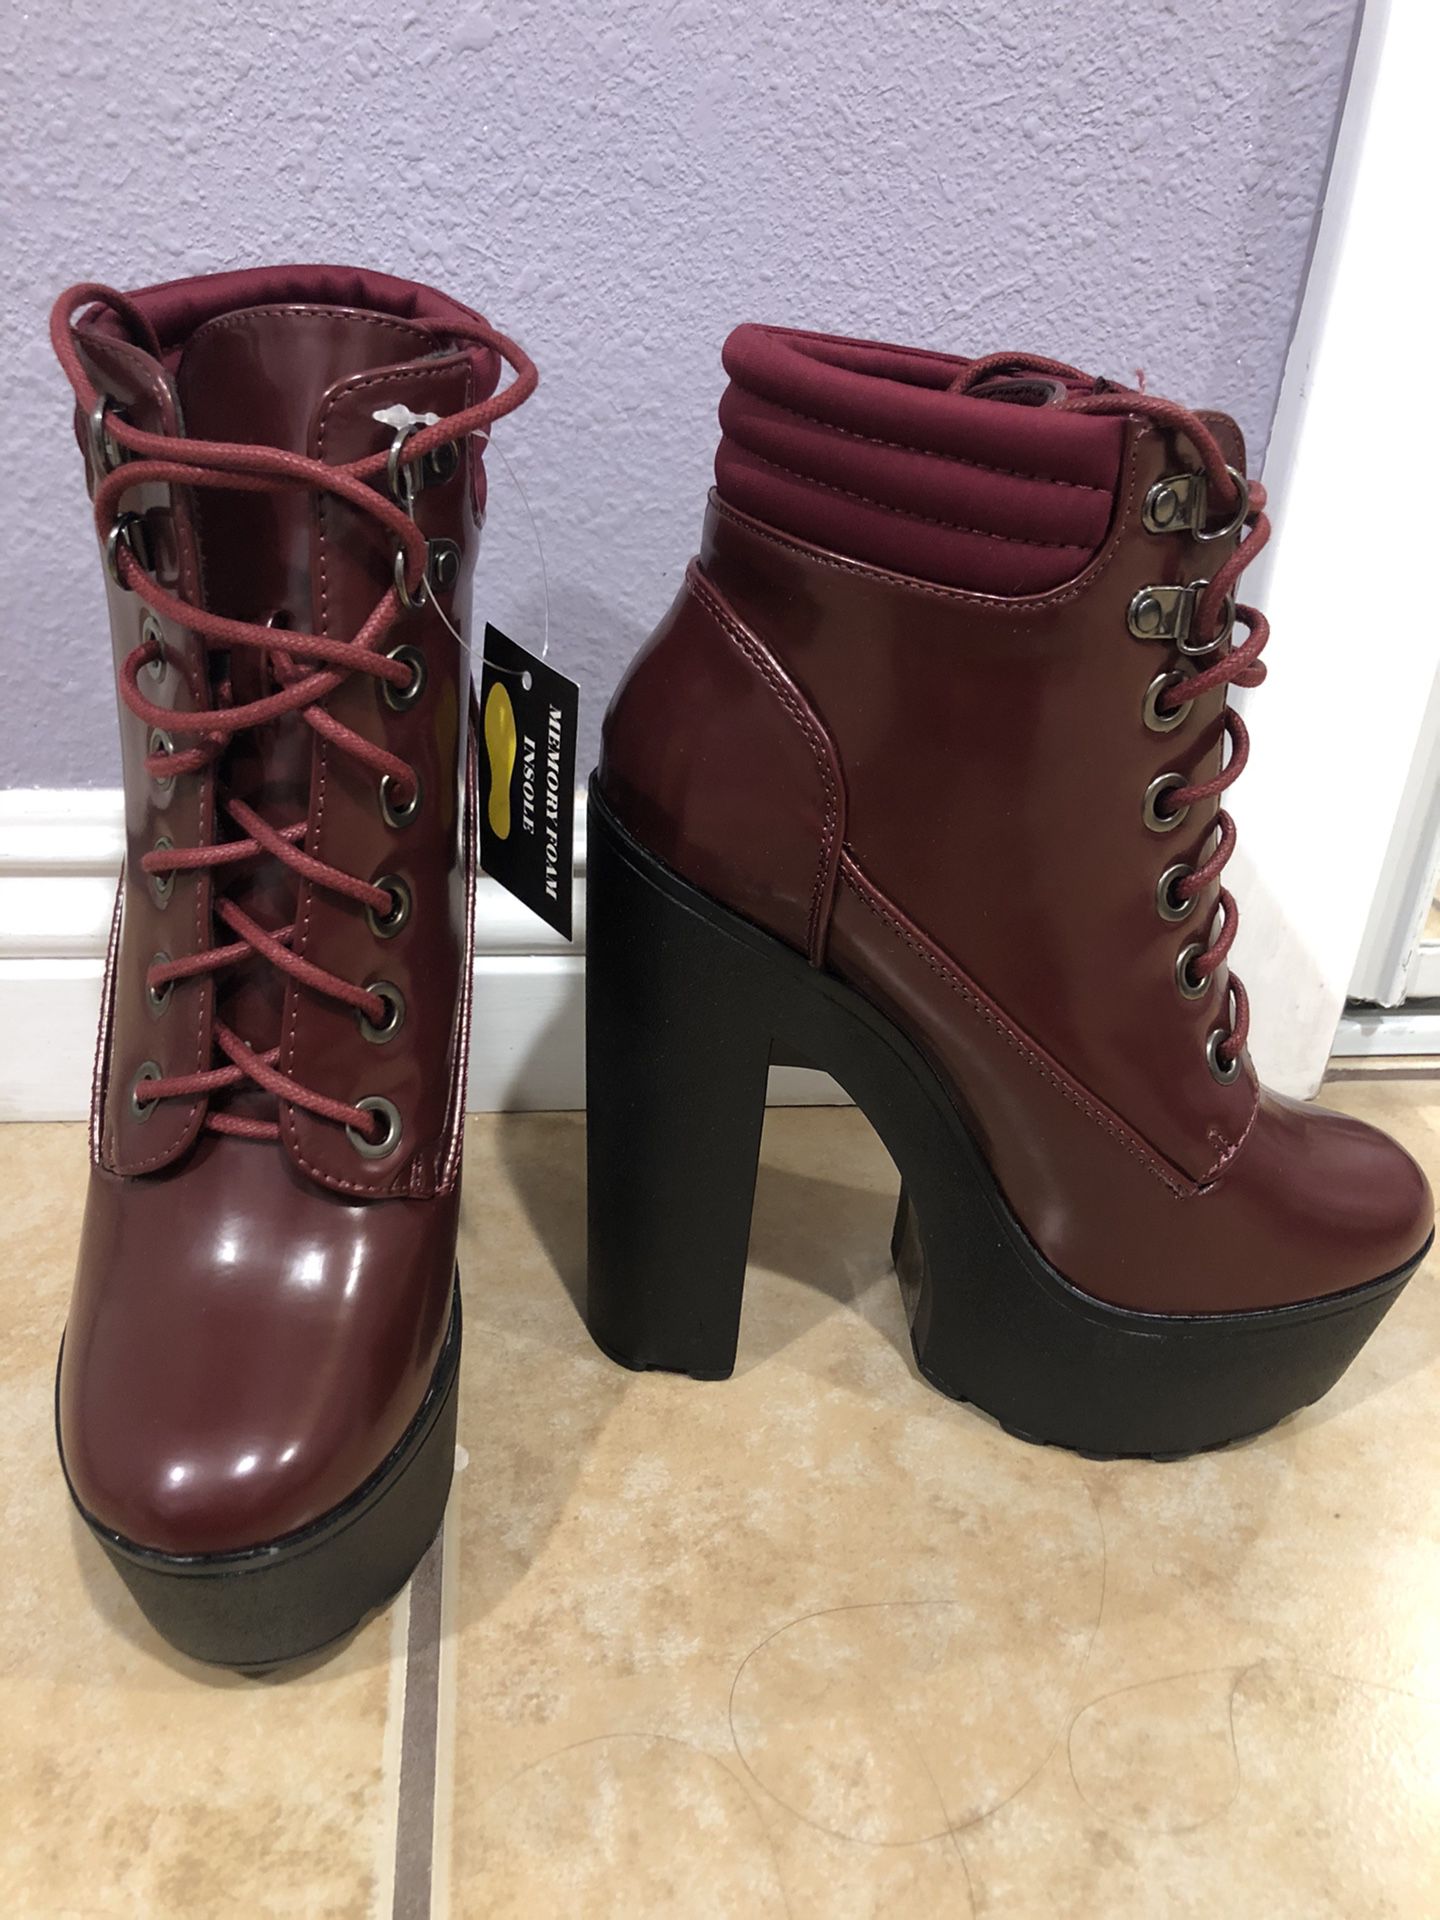 Fashion Nova The More the Better Bootie in Burgundy Size 6